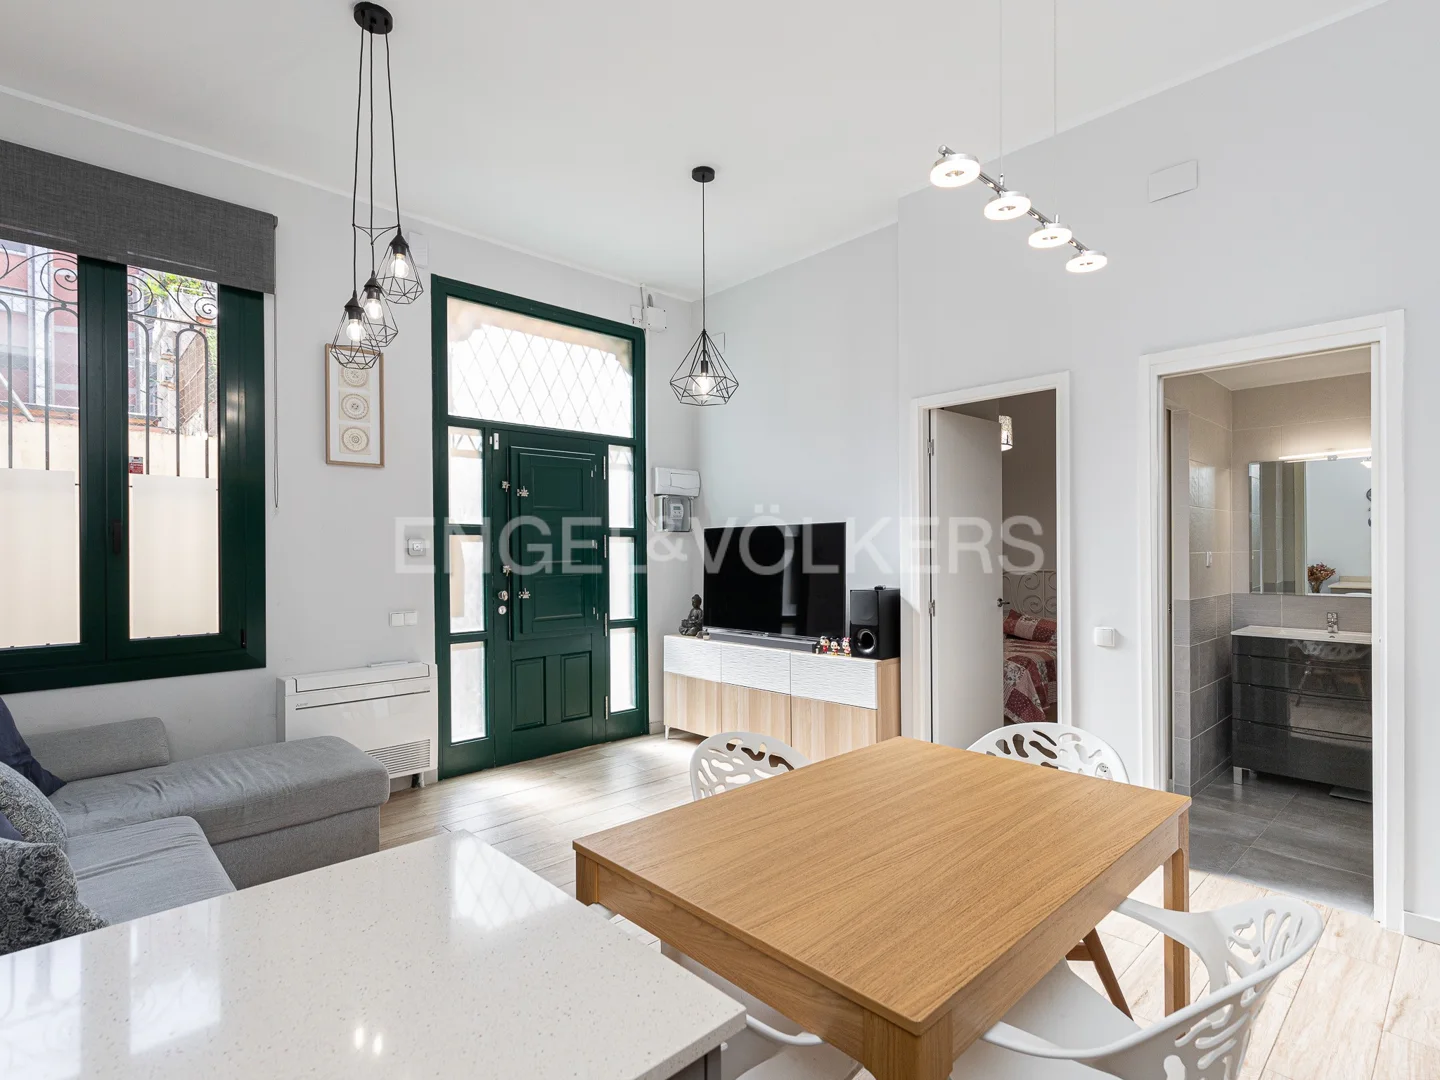 Spectacular refurbished apartment in Sants